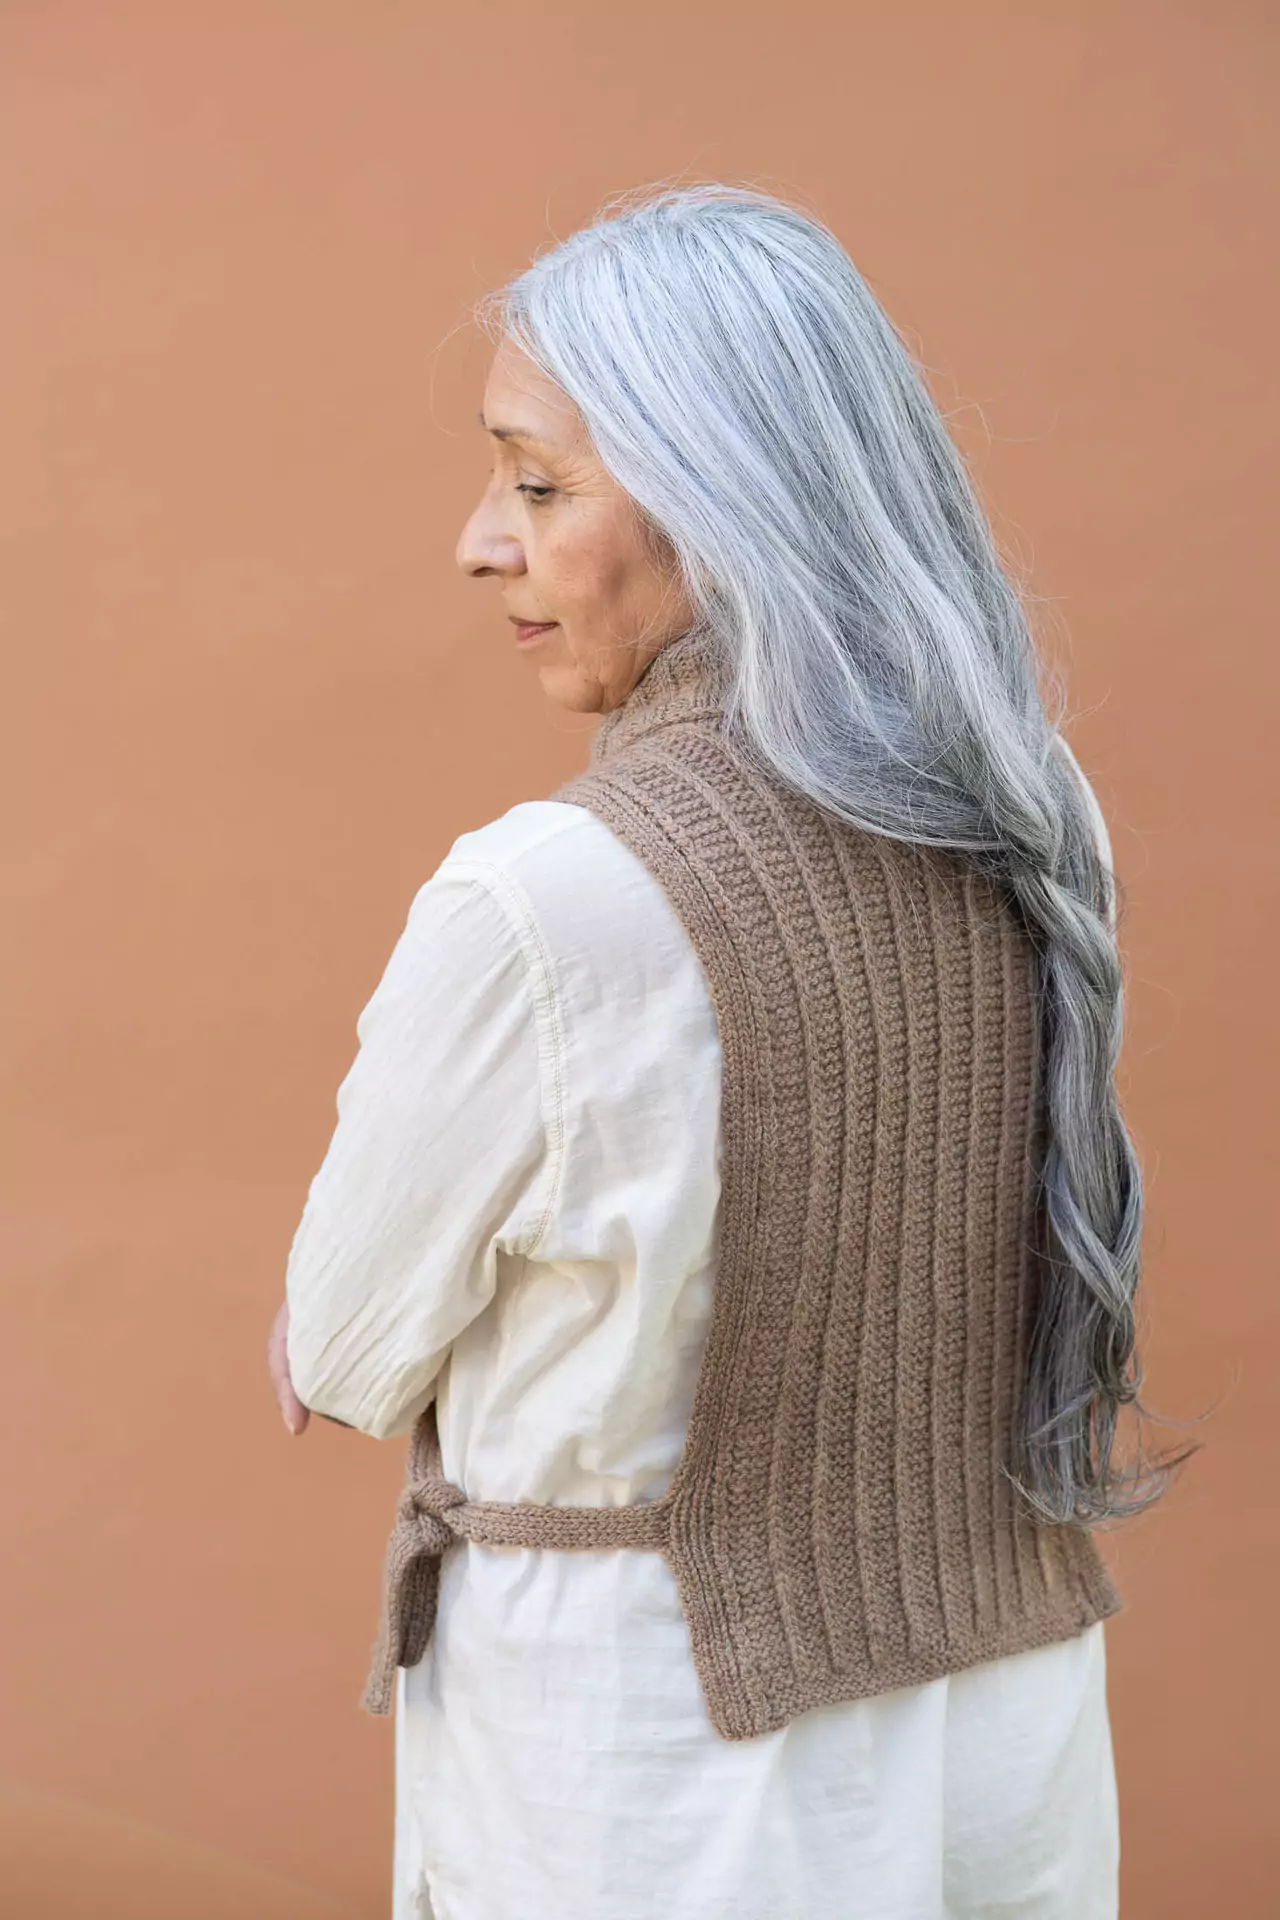 View of a mature silver haired woman's back showing the texture of a knitted dickey accessory